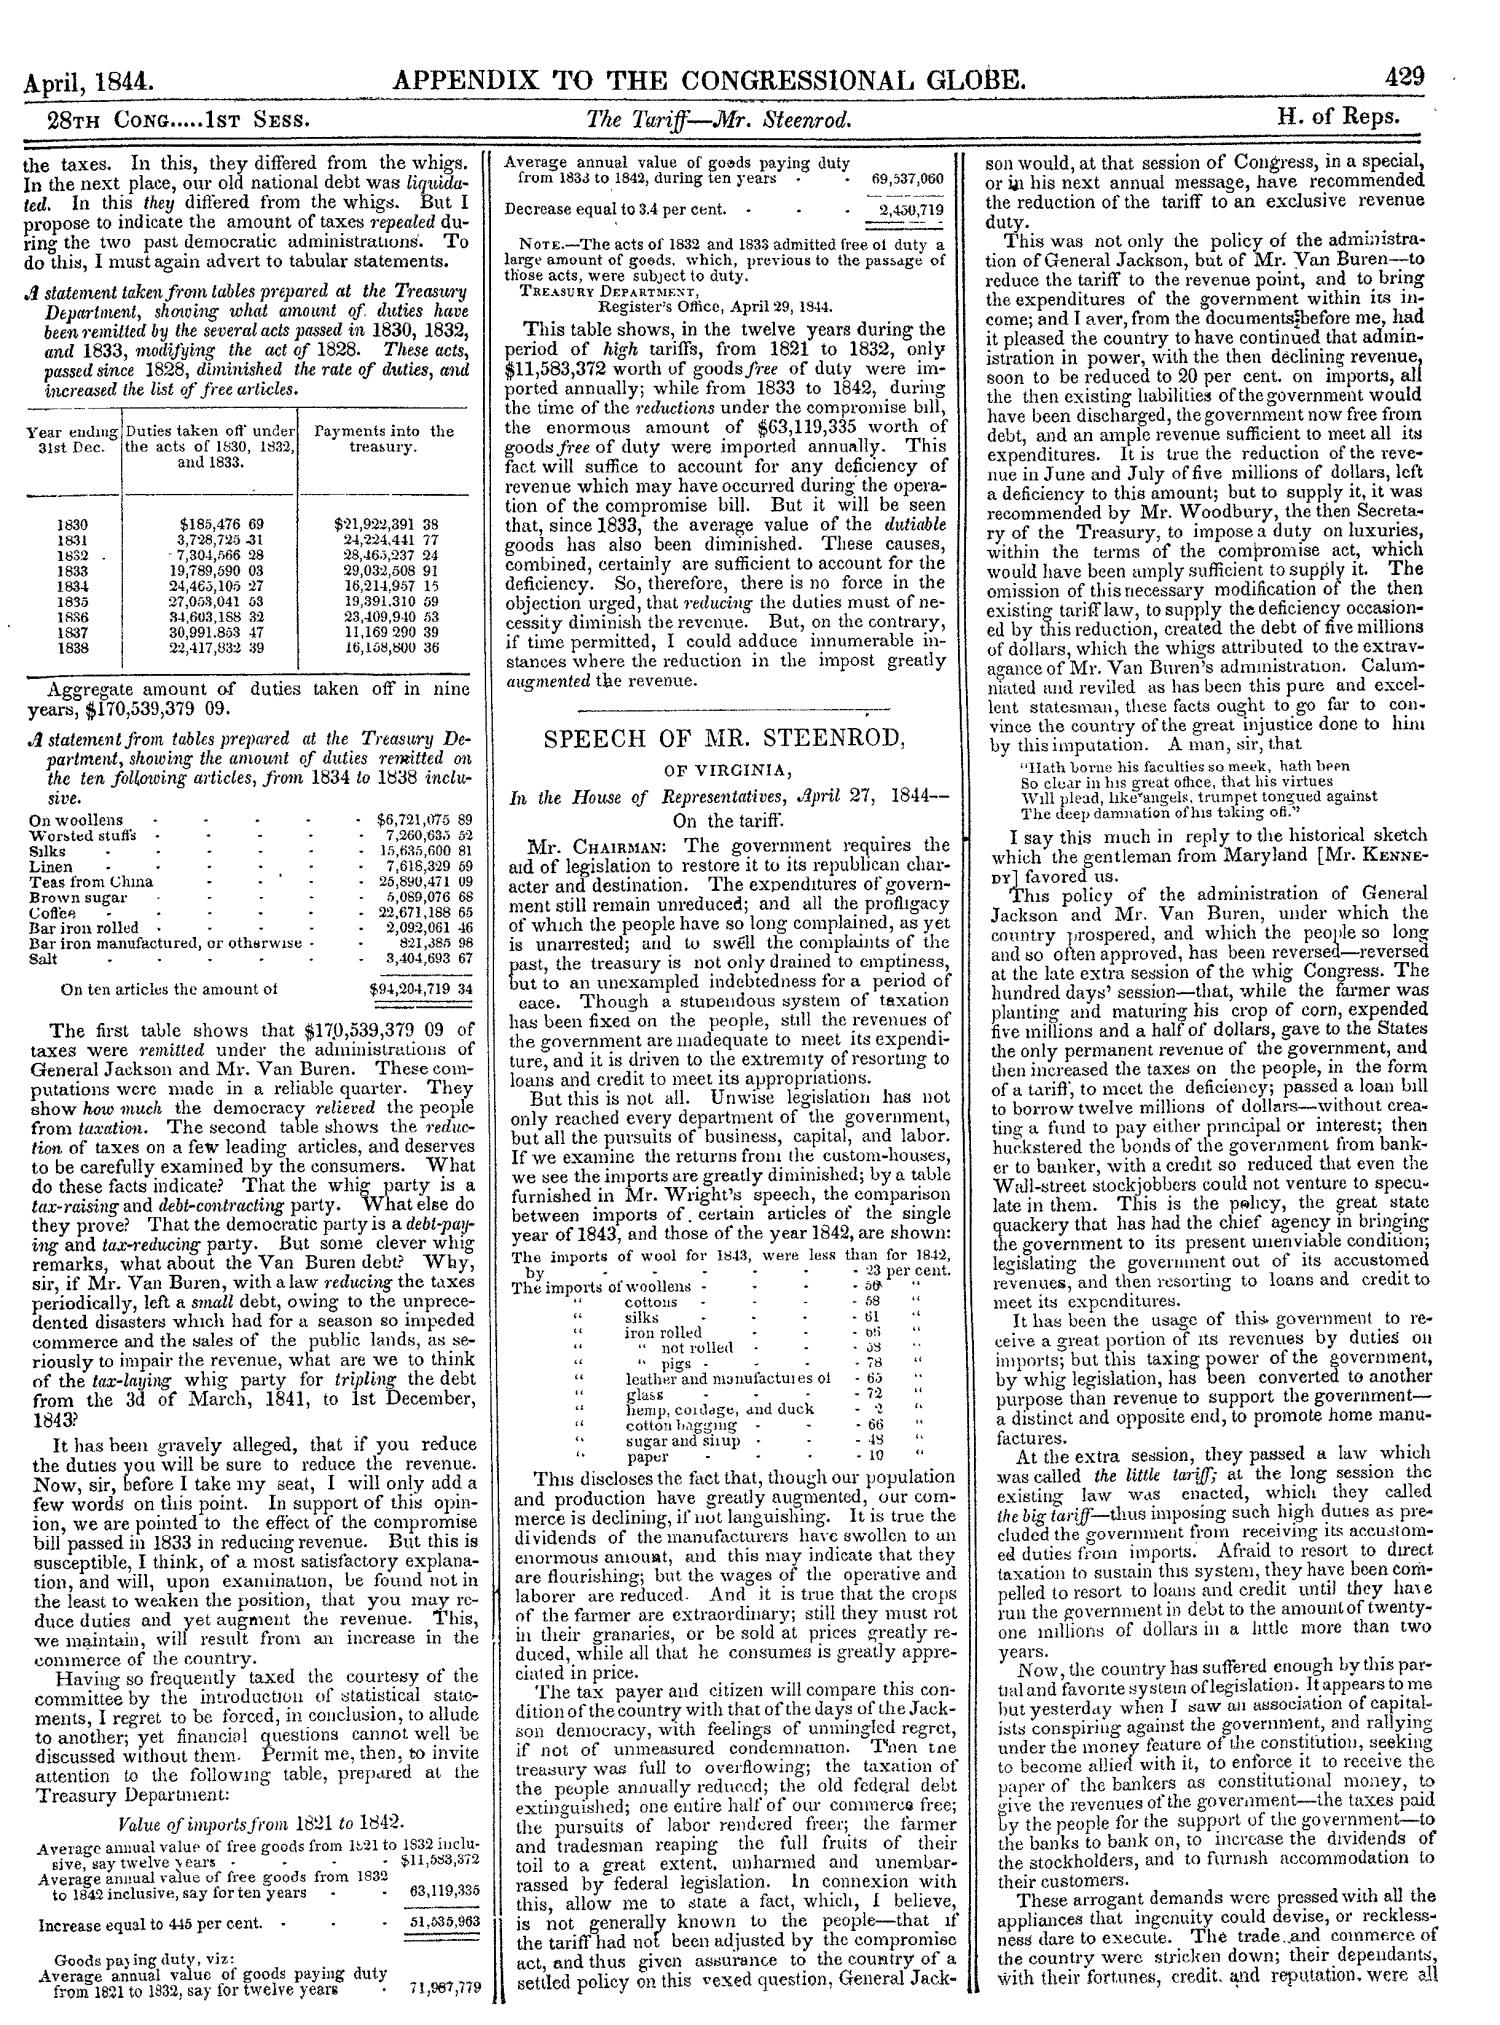 The Congressional Globe, Volume 13, Part 2: Twenty-Eighth Congress, First Session
                                                
                                                    429
                                                